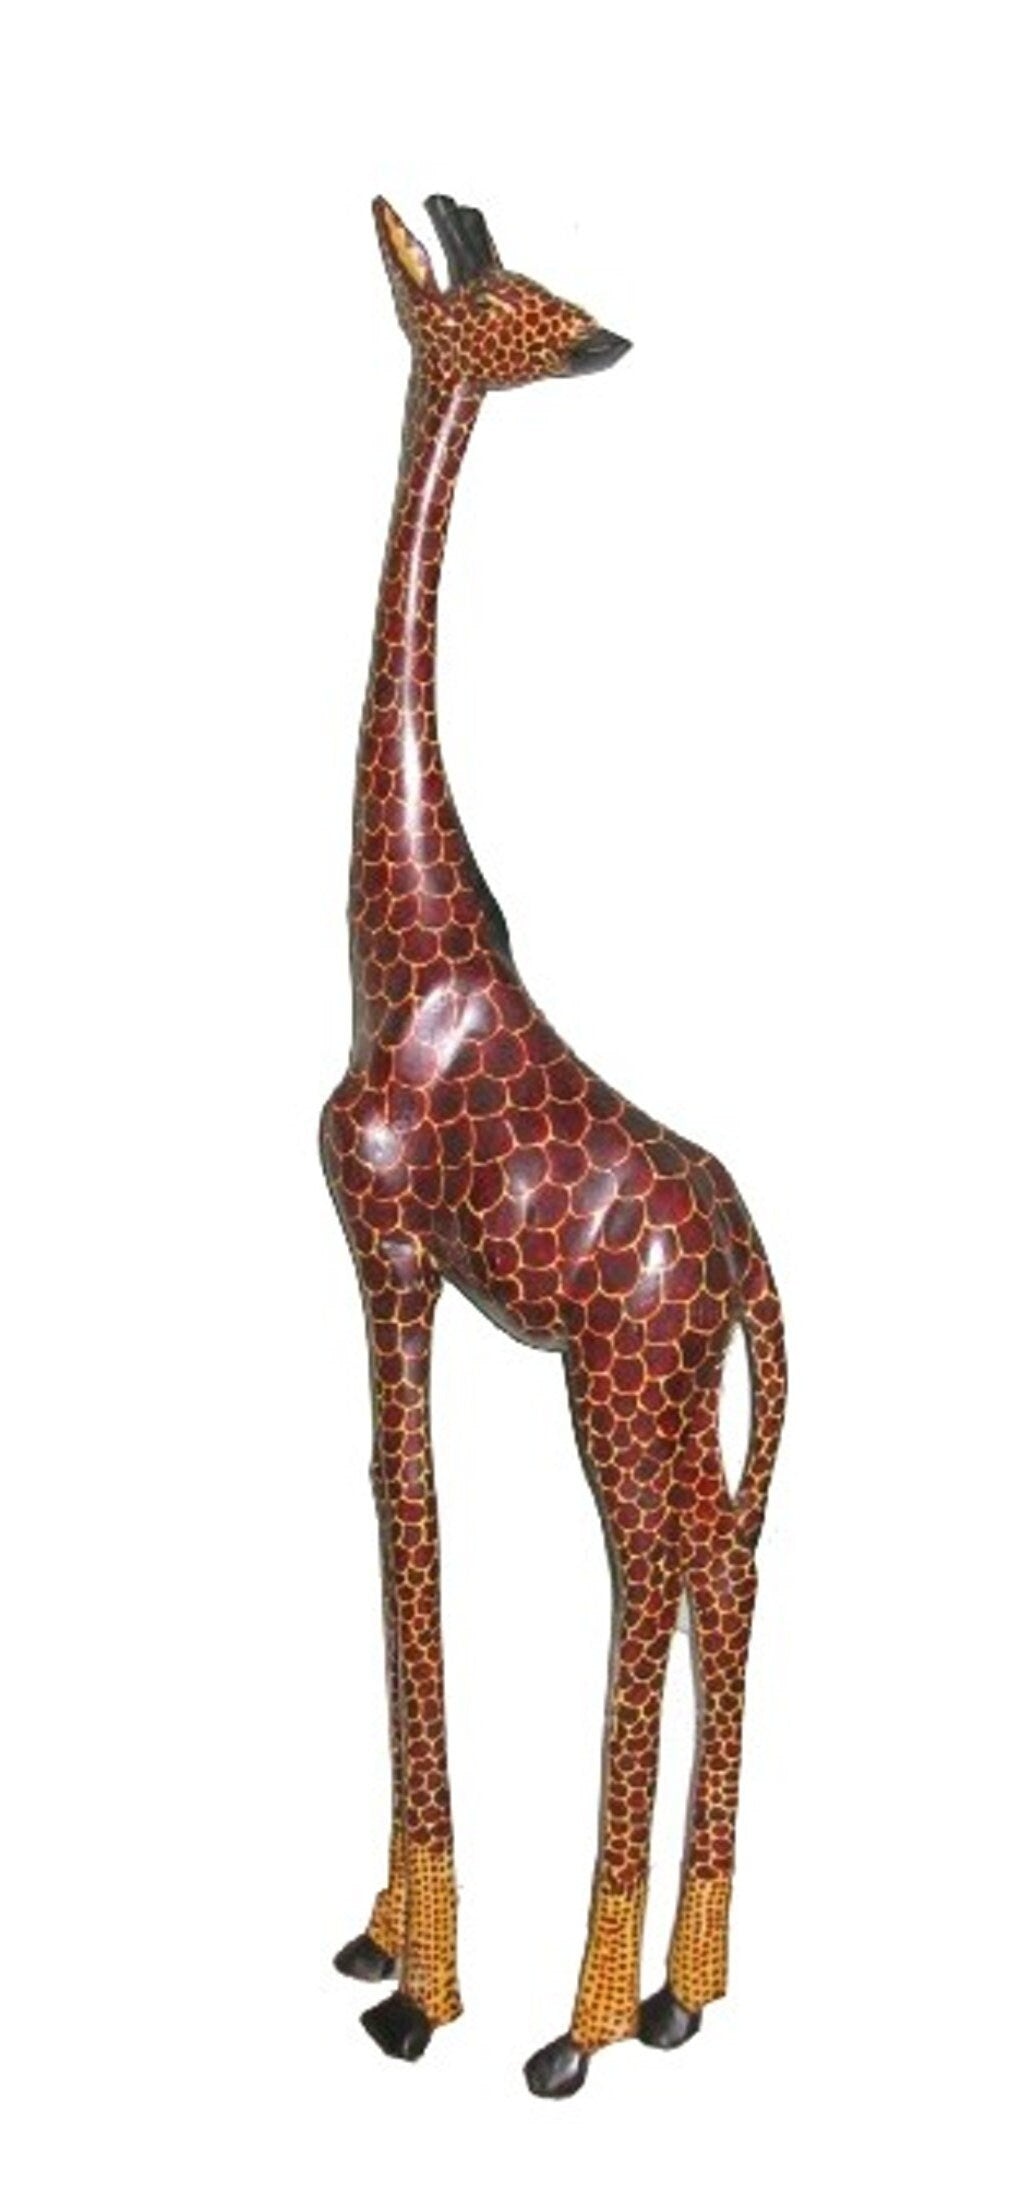 African Giraffe Carving in Wood Choose Size 4 foot (120 cm) / 3 foot (90 cm) / 2 foot (60 cm) Tall Fair Trade with Story-card